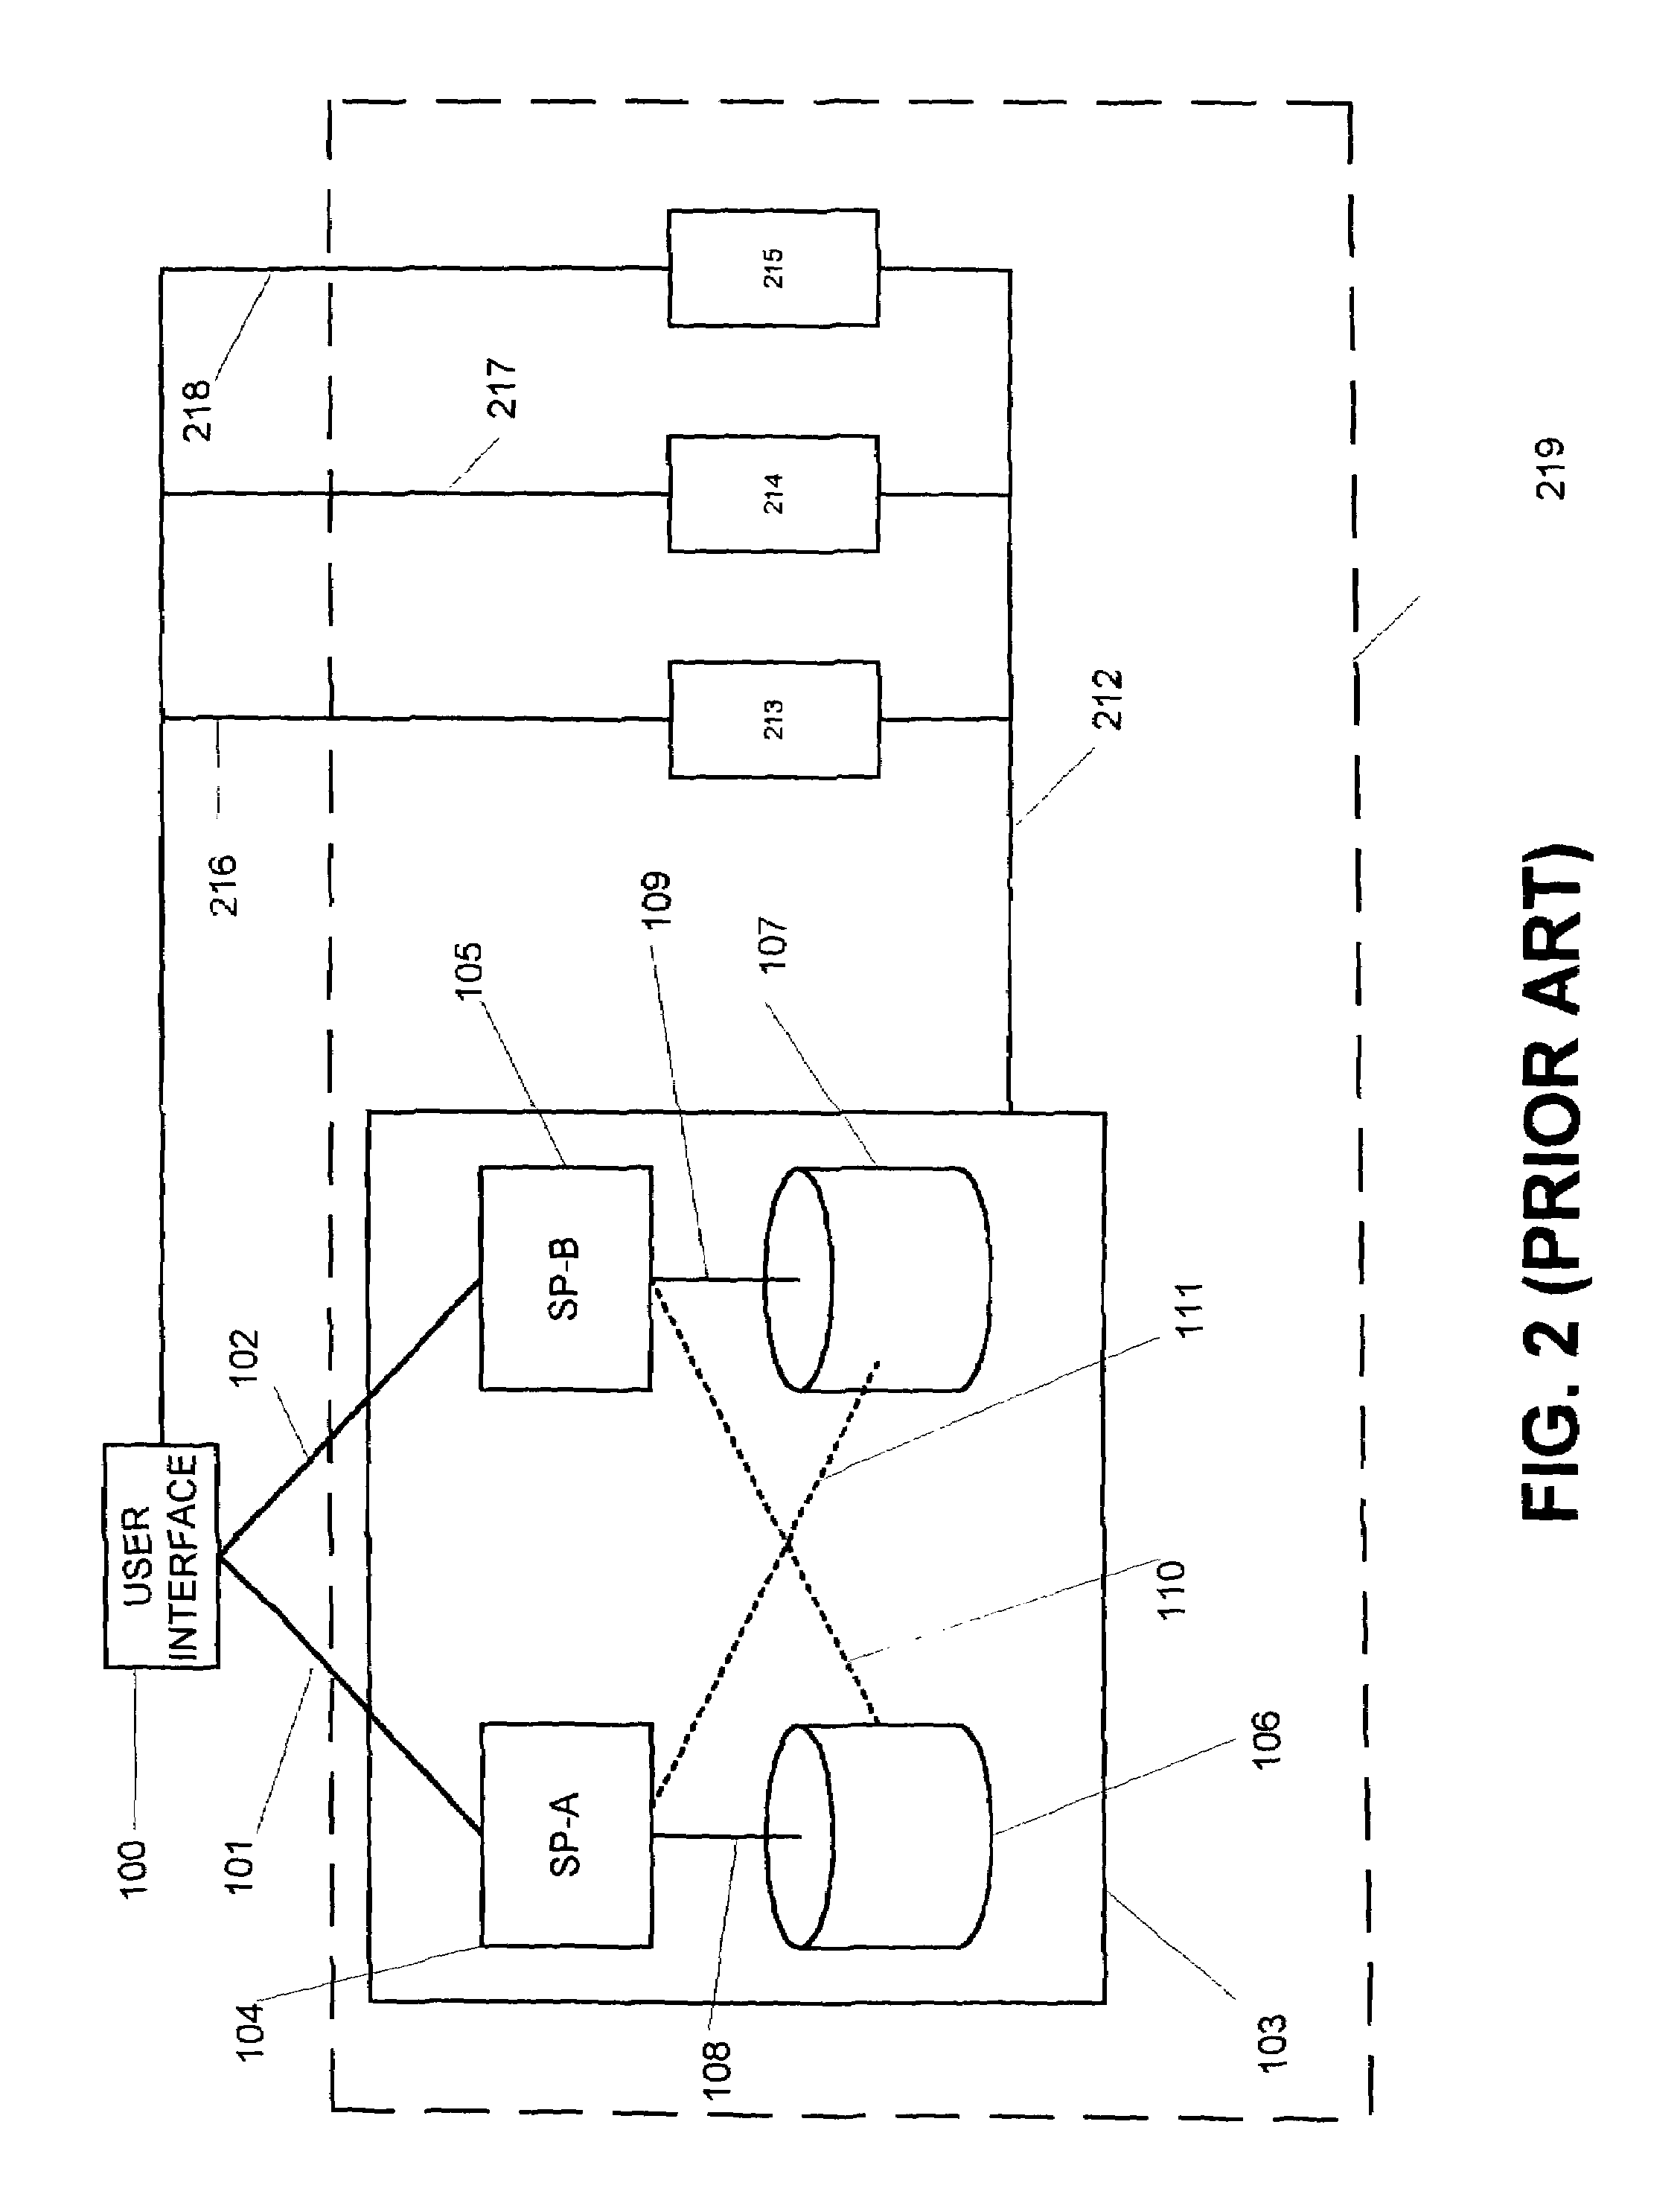 Single management point for a storage system or storage area network